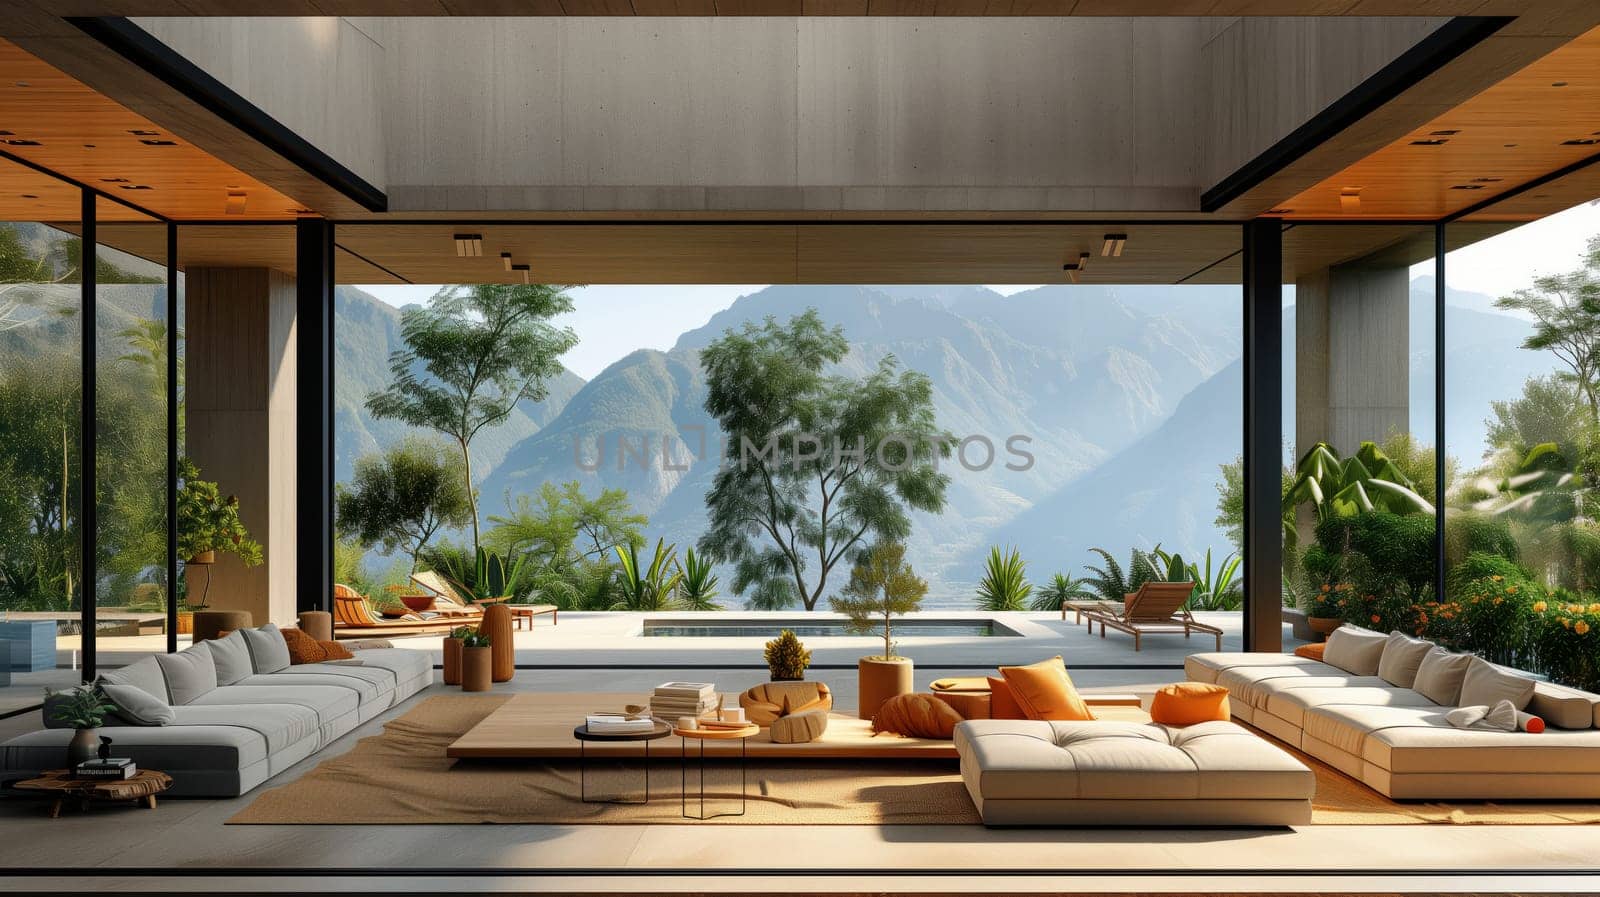 Interior design with furniture and a view of mountains, accentuated by a plant by richwolf